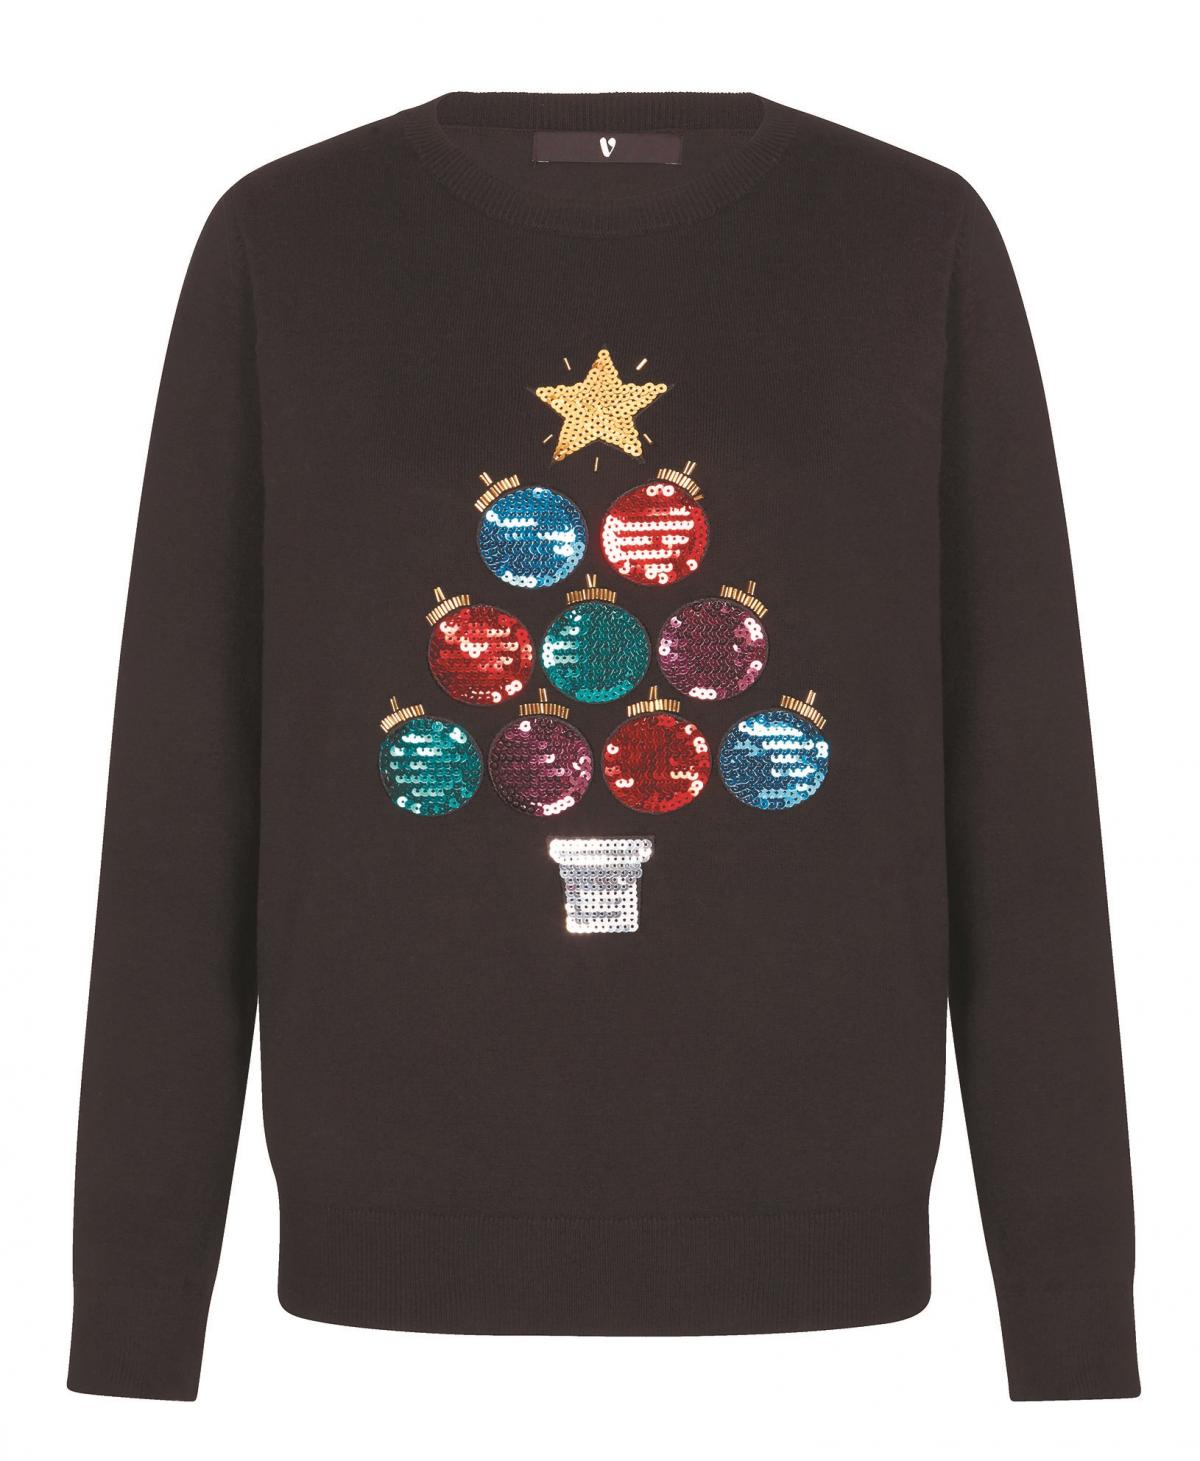 V by Very, Embellished Bauble Christmas Tree Jumper, £25